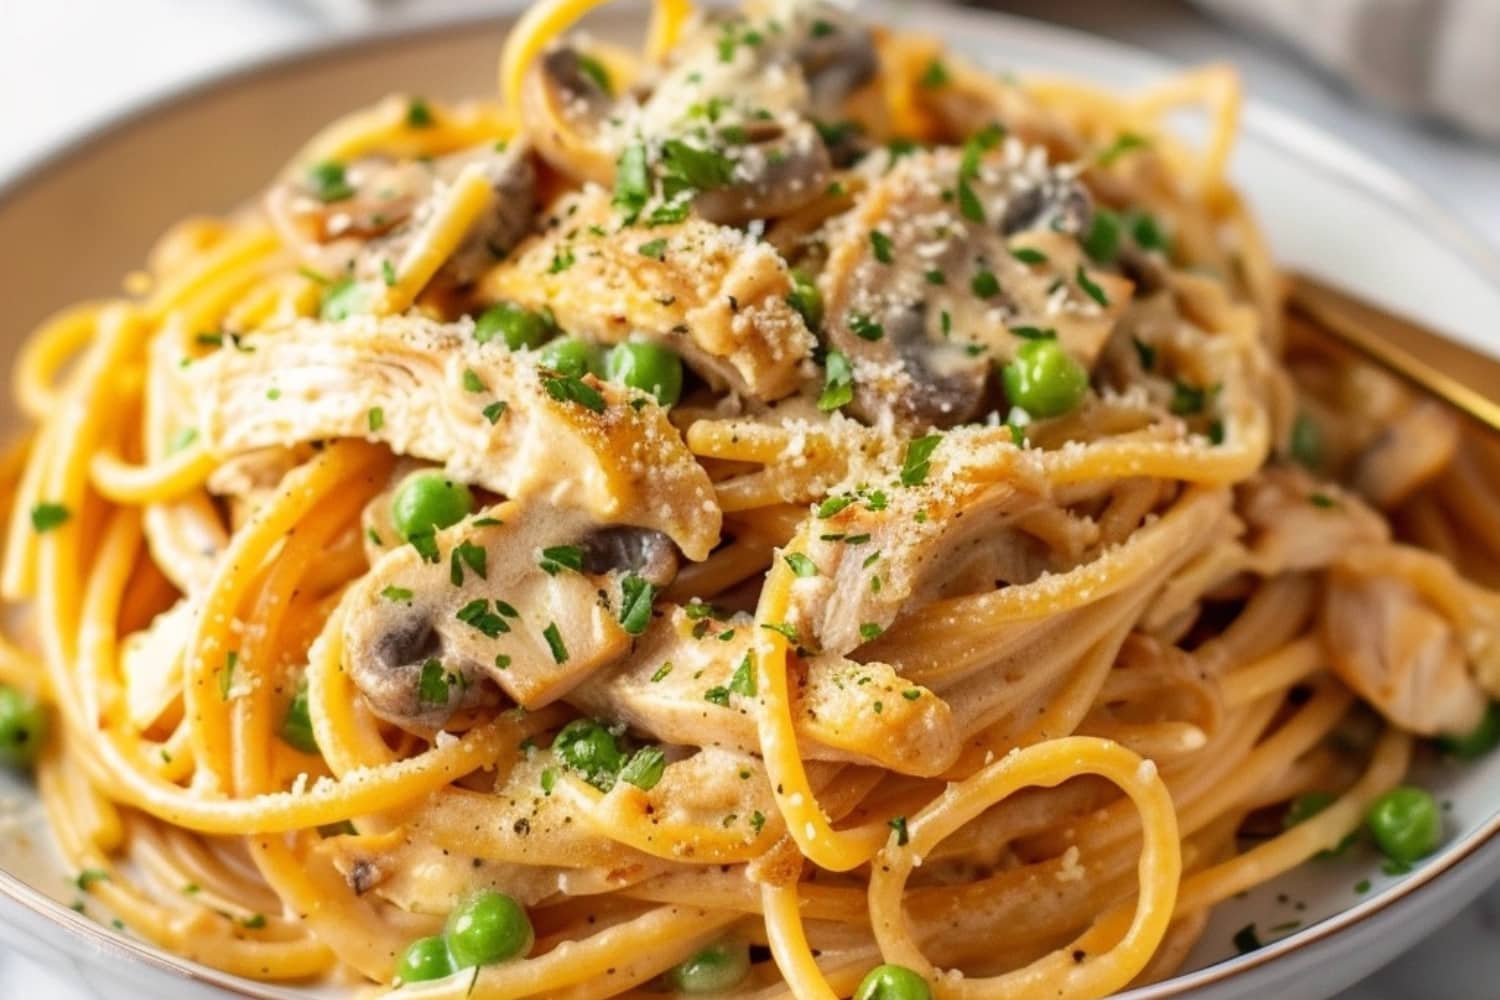 Chicken tetrazzini served in a white plate with shredded chicken, green peas and creamy sauce.